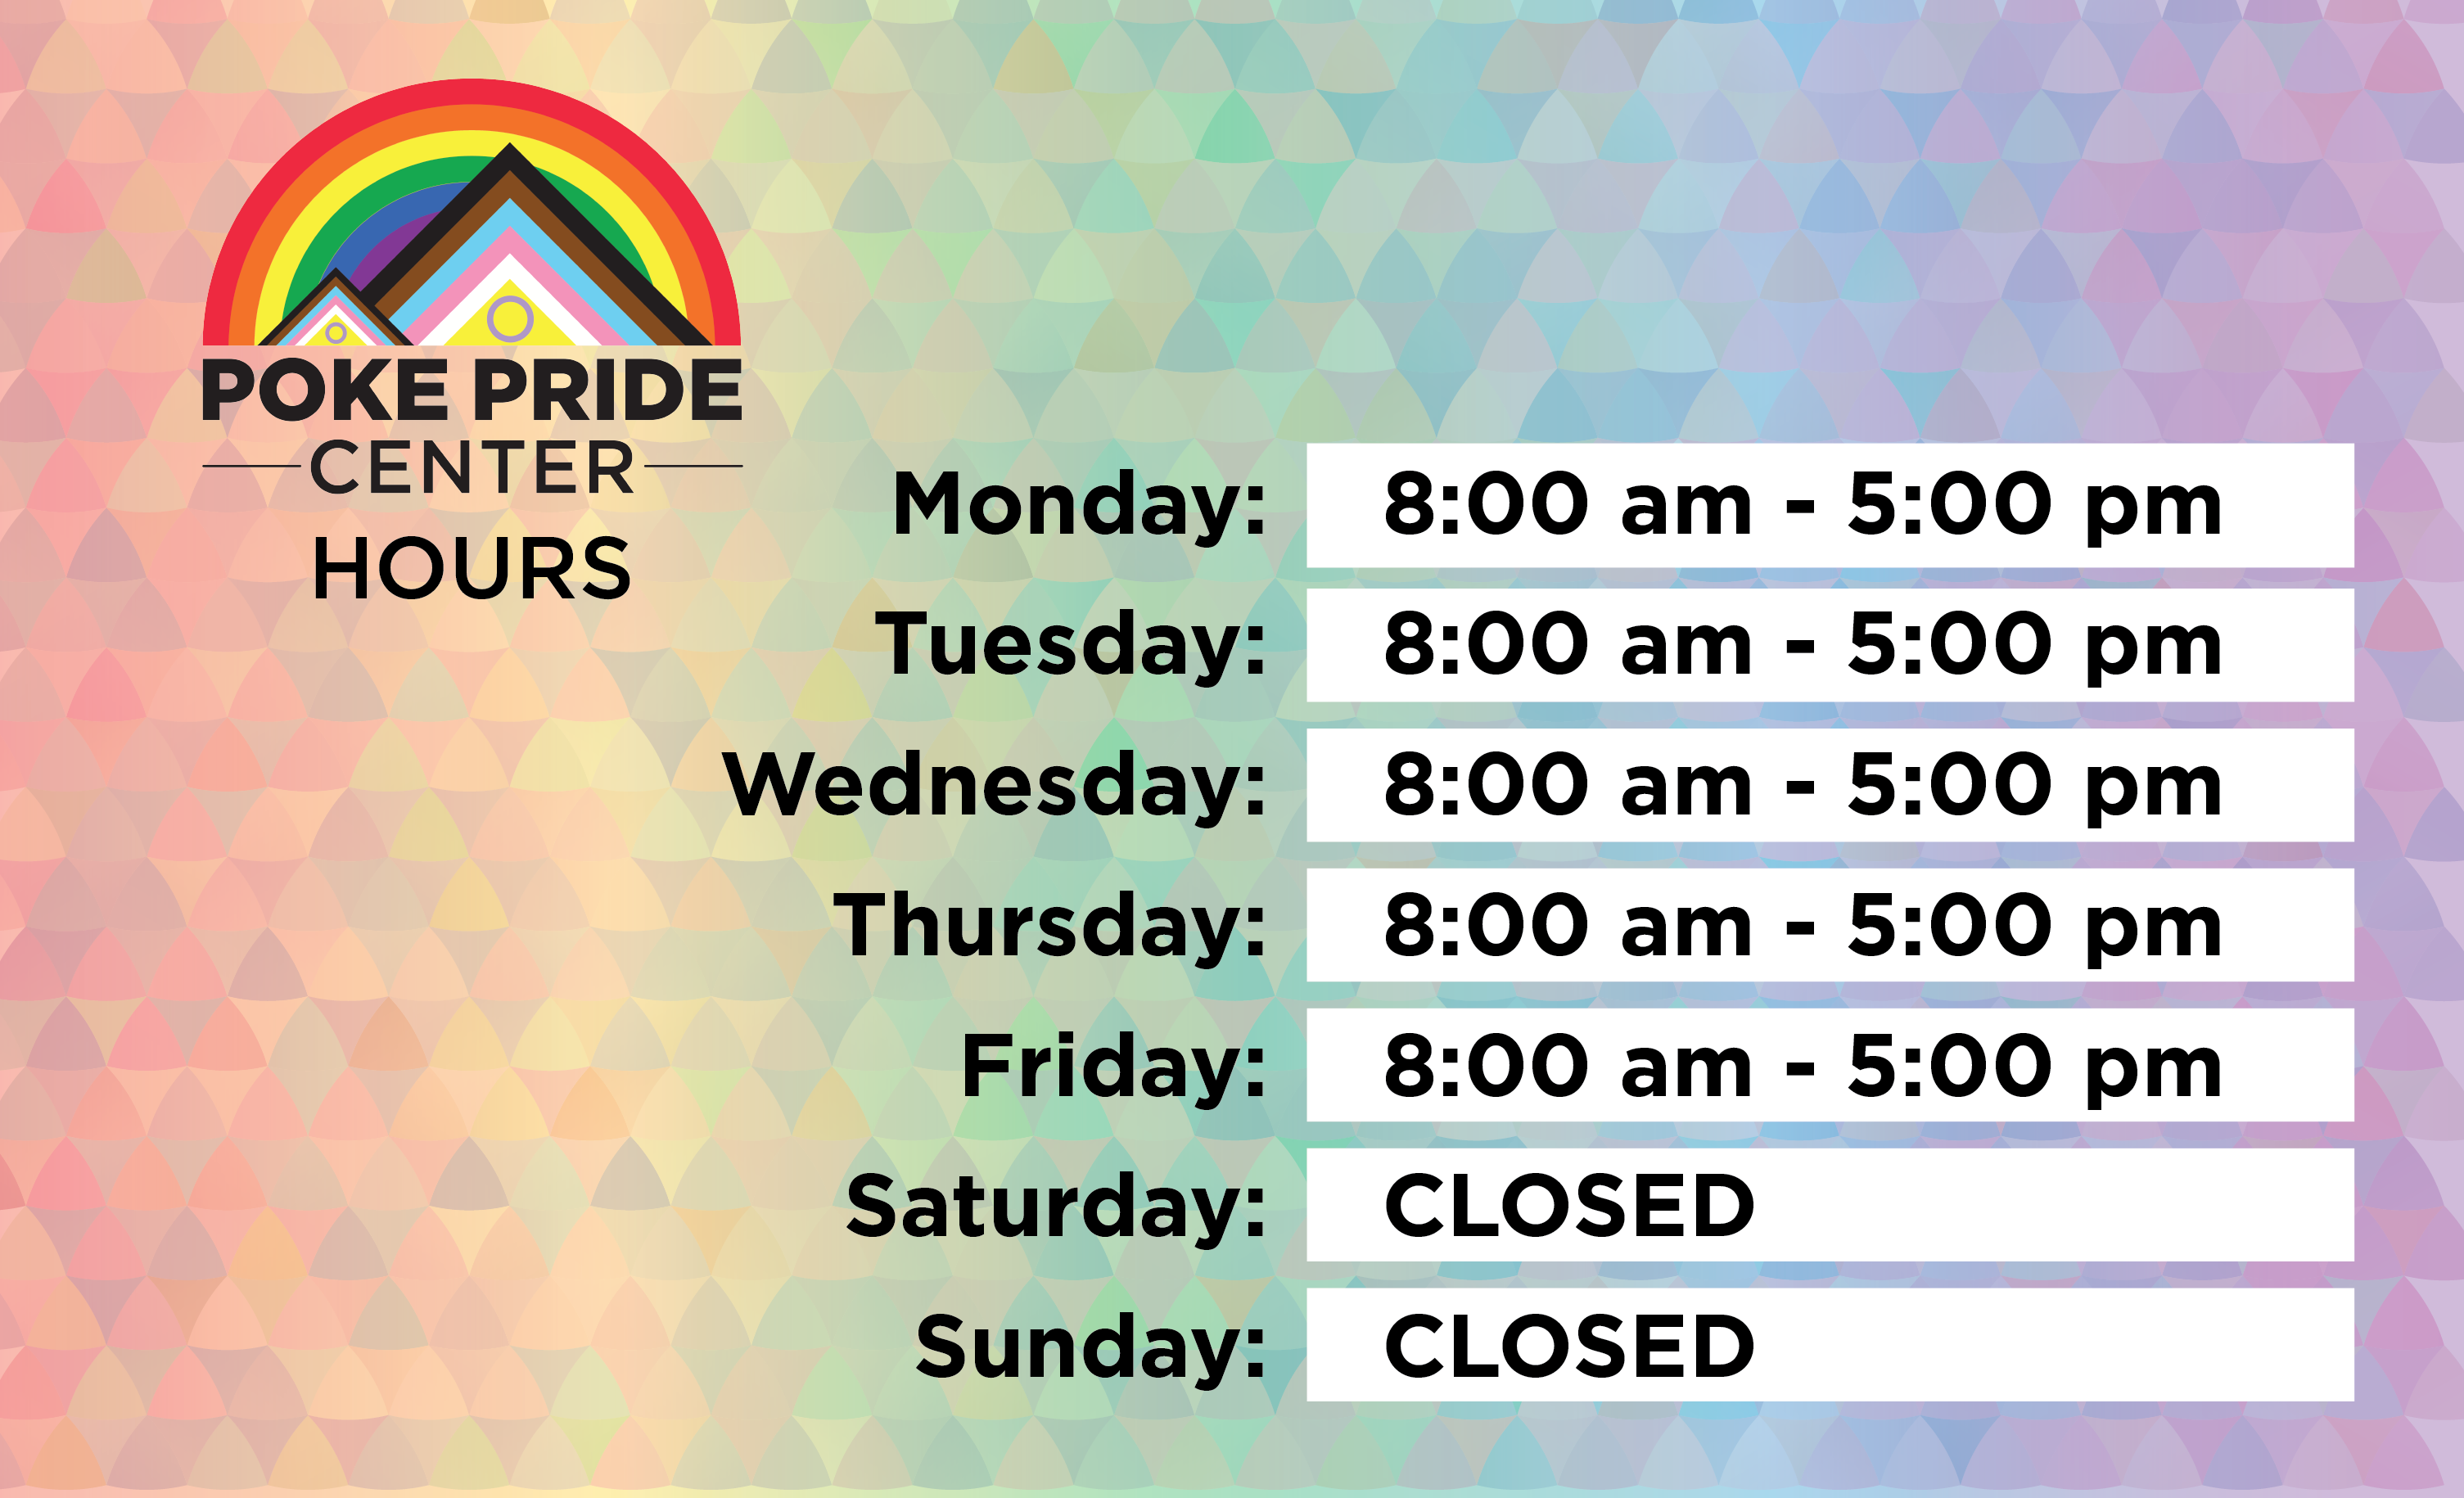 Poke Pride Center Hours Monday through Friday 8am-5pm, Closed on the Weekends